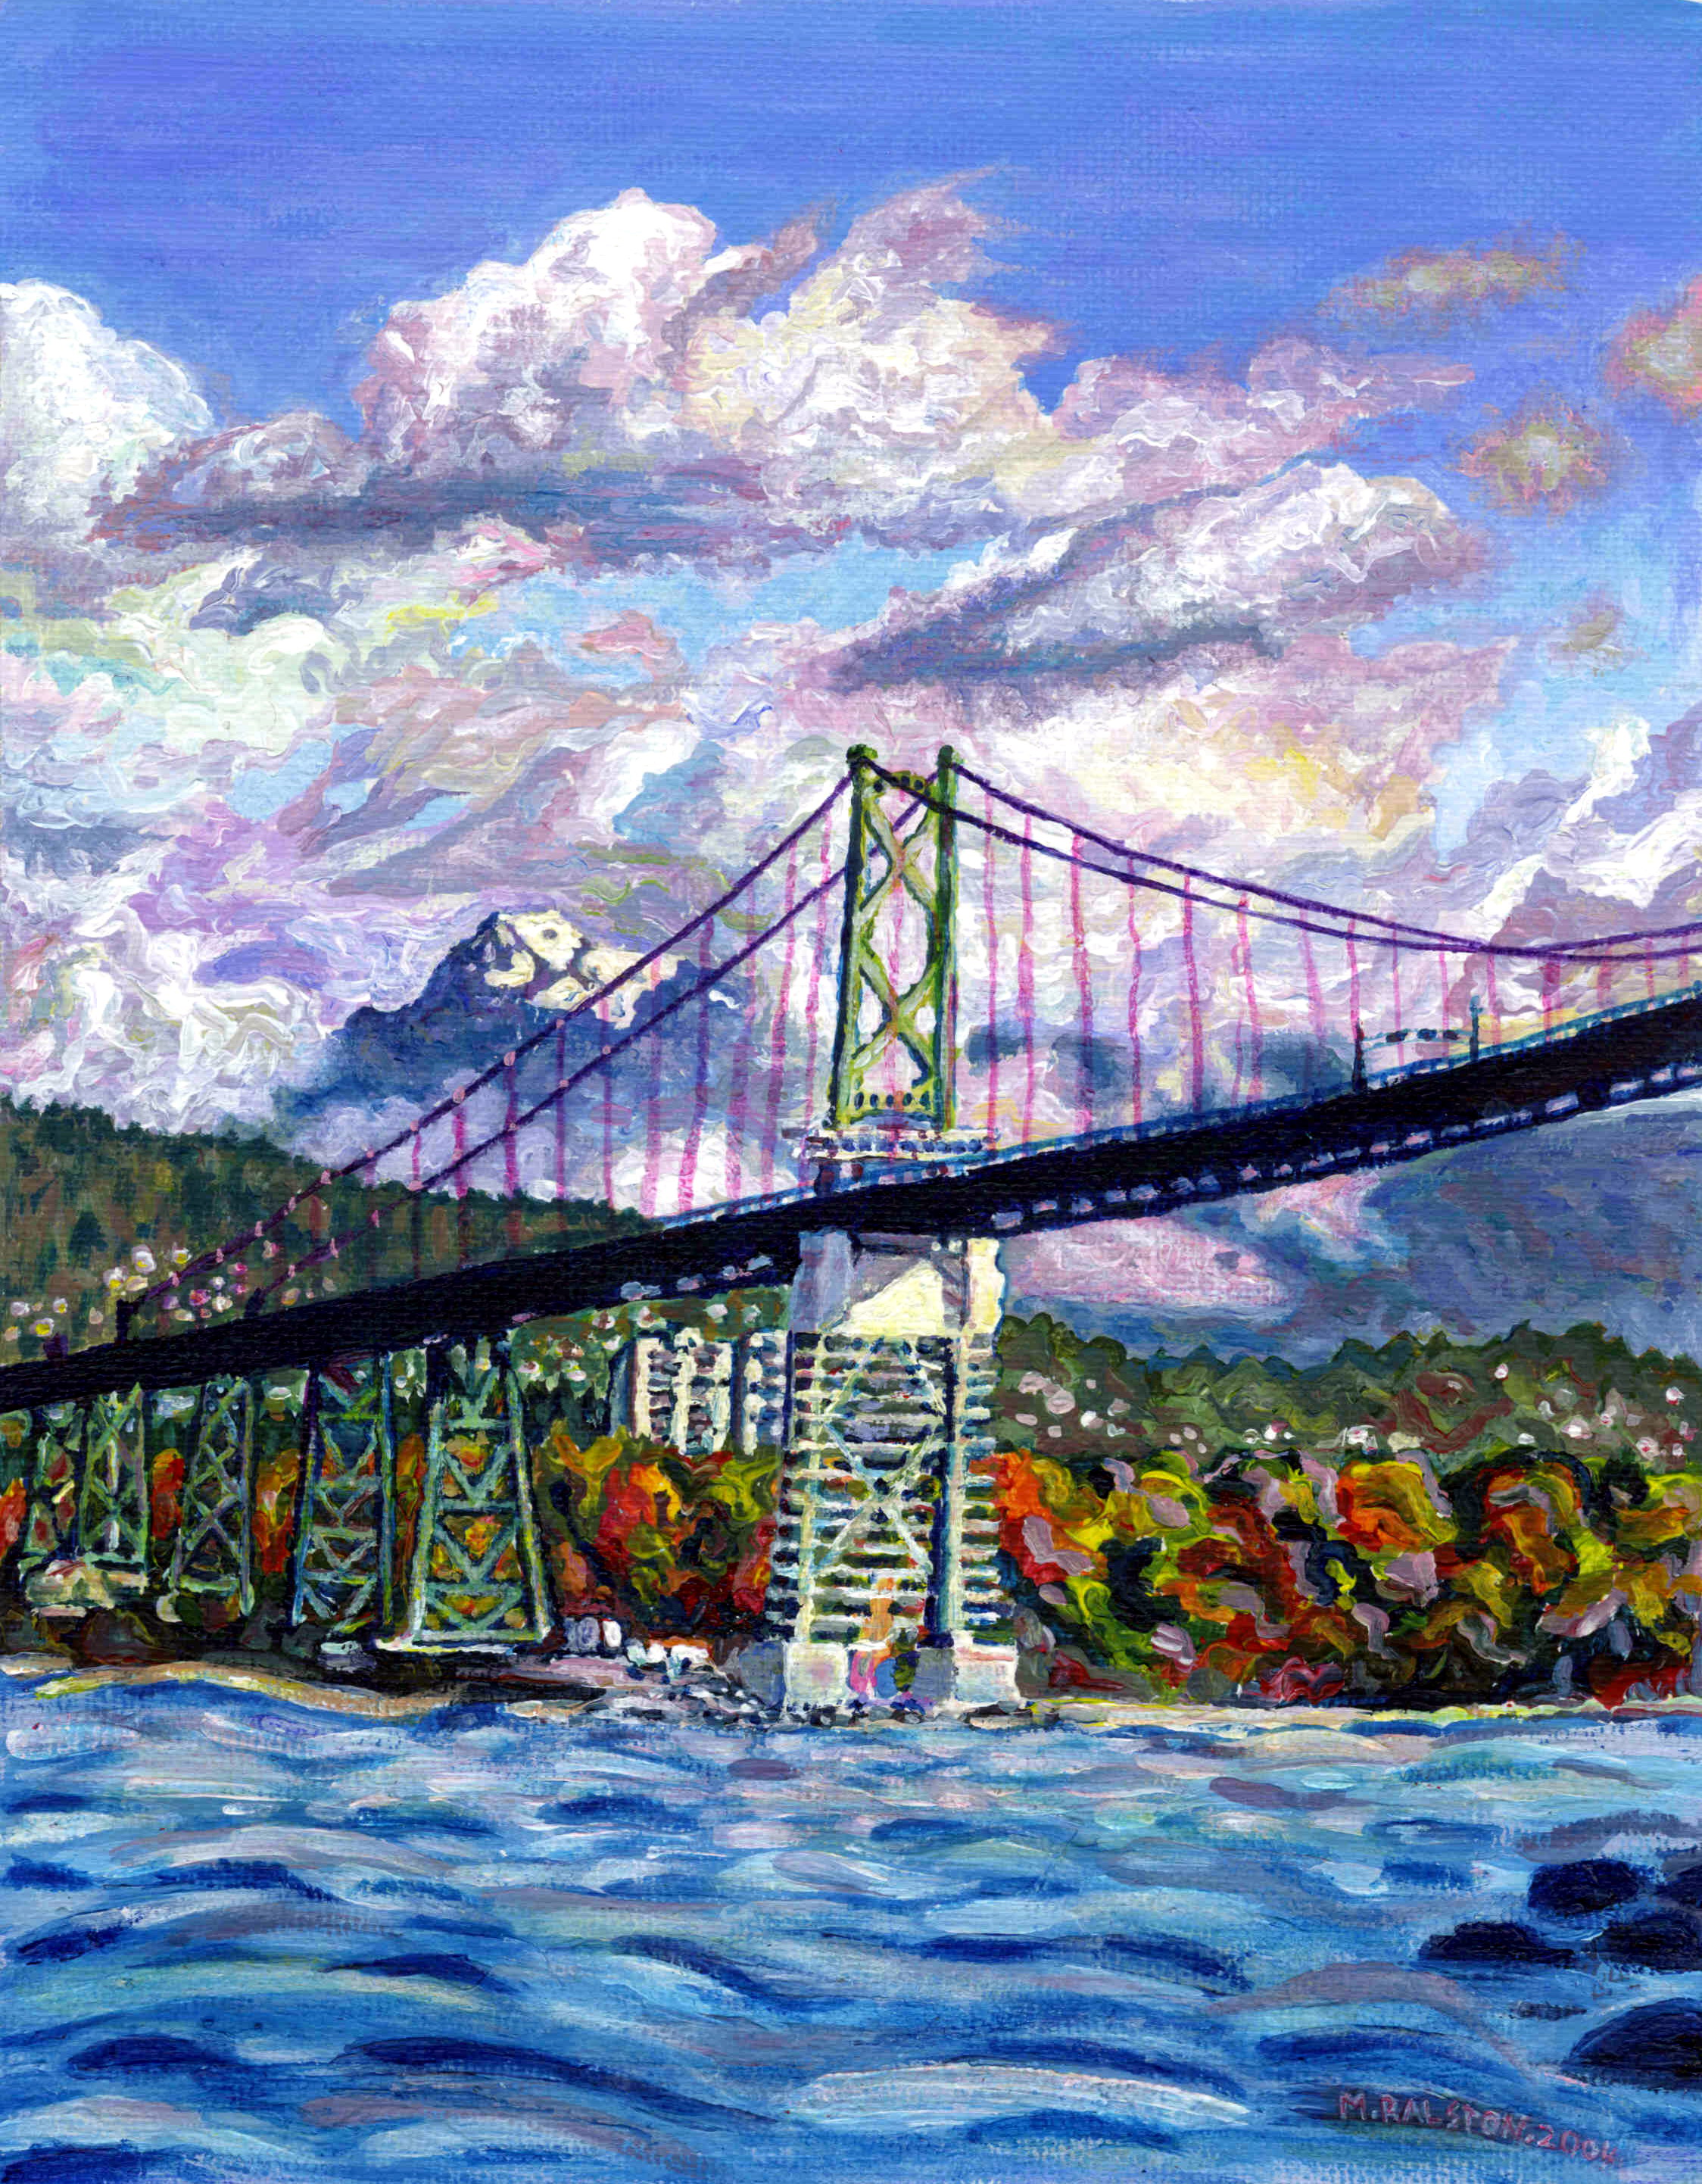 Acrylic painting of the Lion's Gate bridge in Vancouver by Morgan Ralston